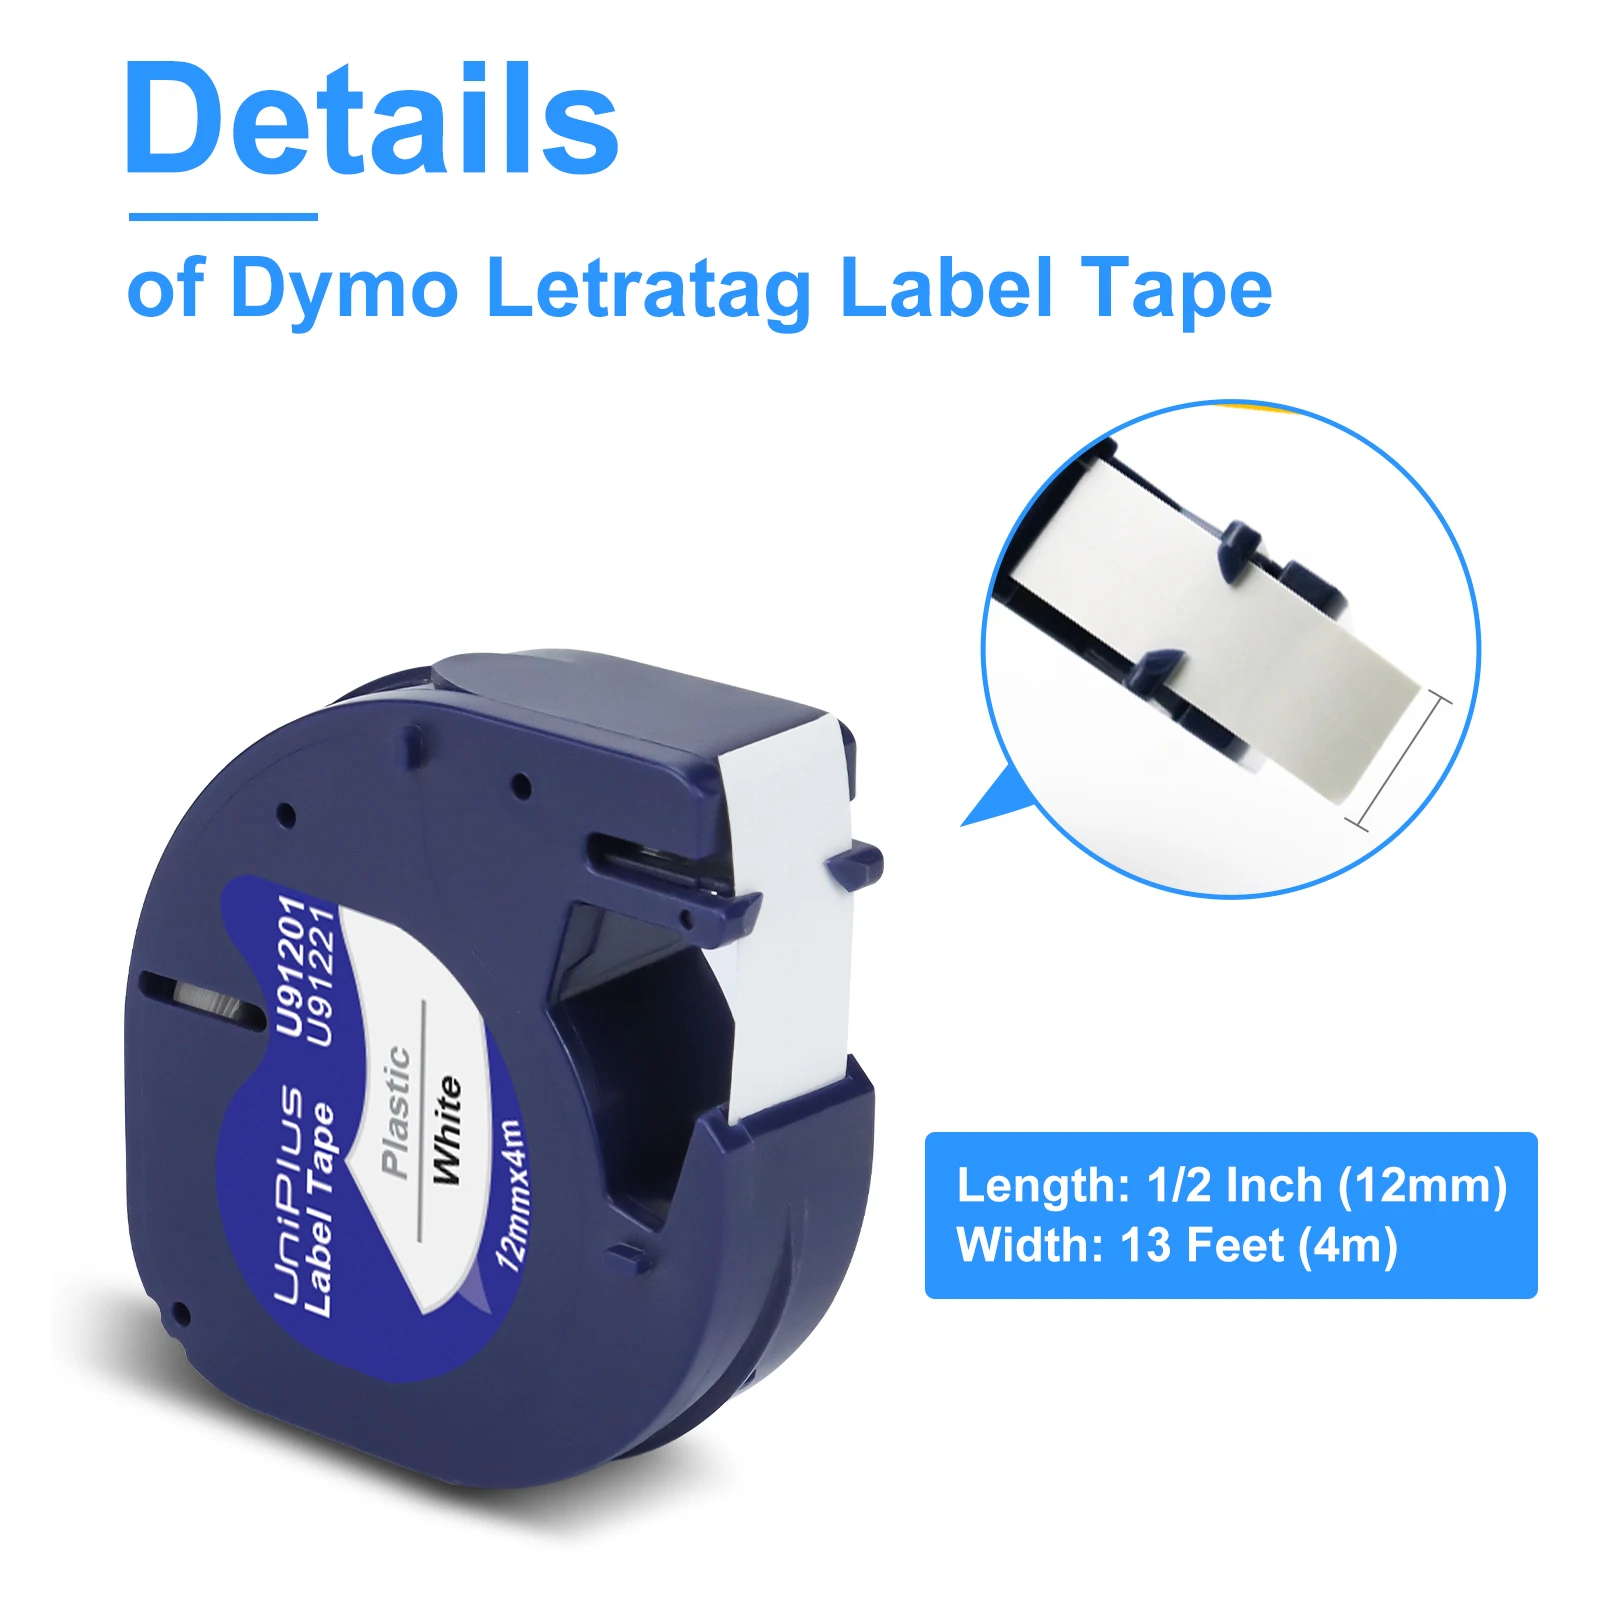 Dymo Label Printer LT-100H Labeling Machine Dymo Letratag LT100H Self Adhesive Labeller Compatible for Dymo LT Label Tapes 12mm